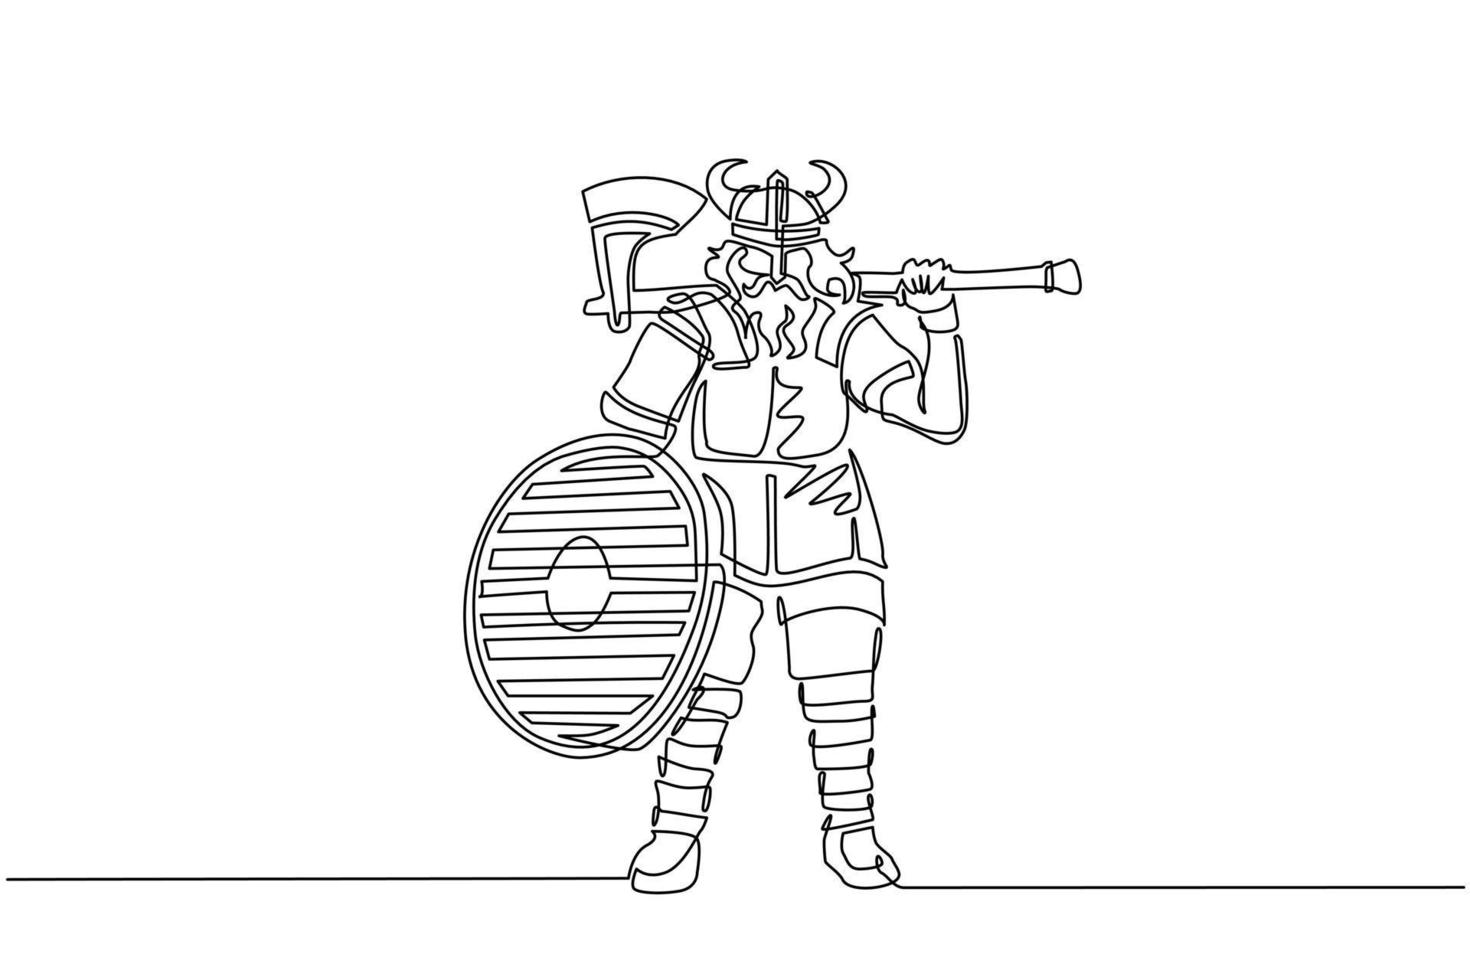 Single continuous line drawing norseman viking warrior raider barbarian wearing horned helmet with beard holding axe and shield on isolated white background. One line draw design vector illustration